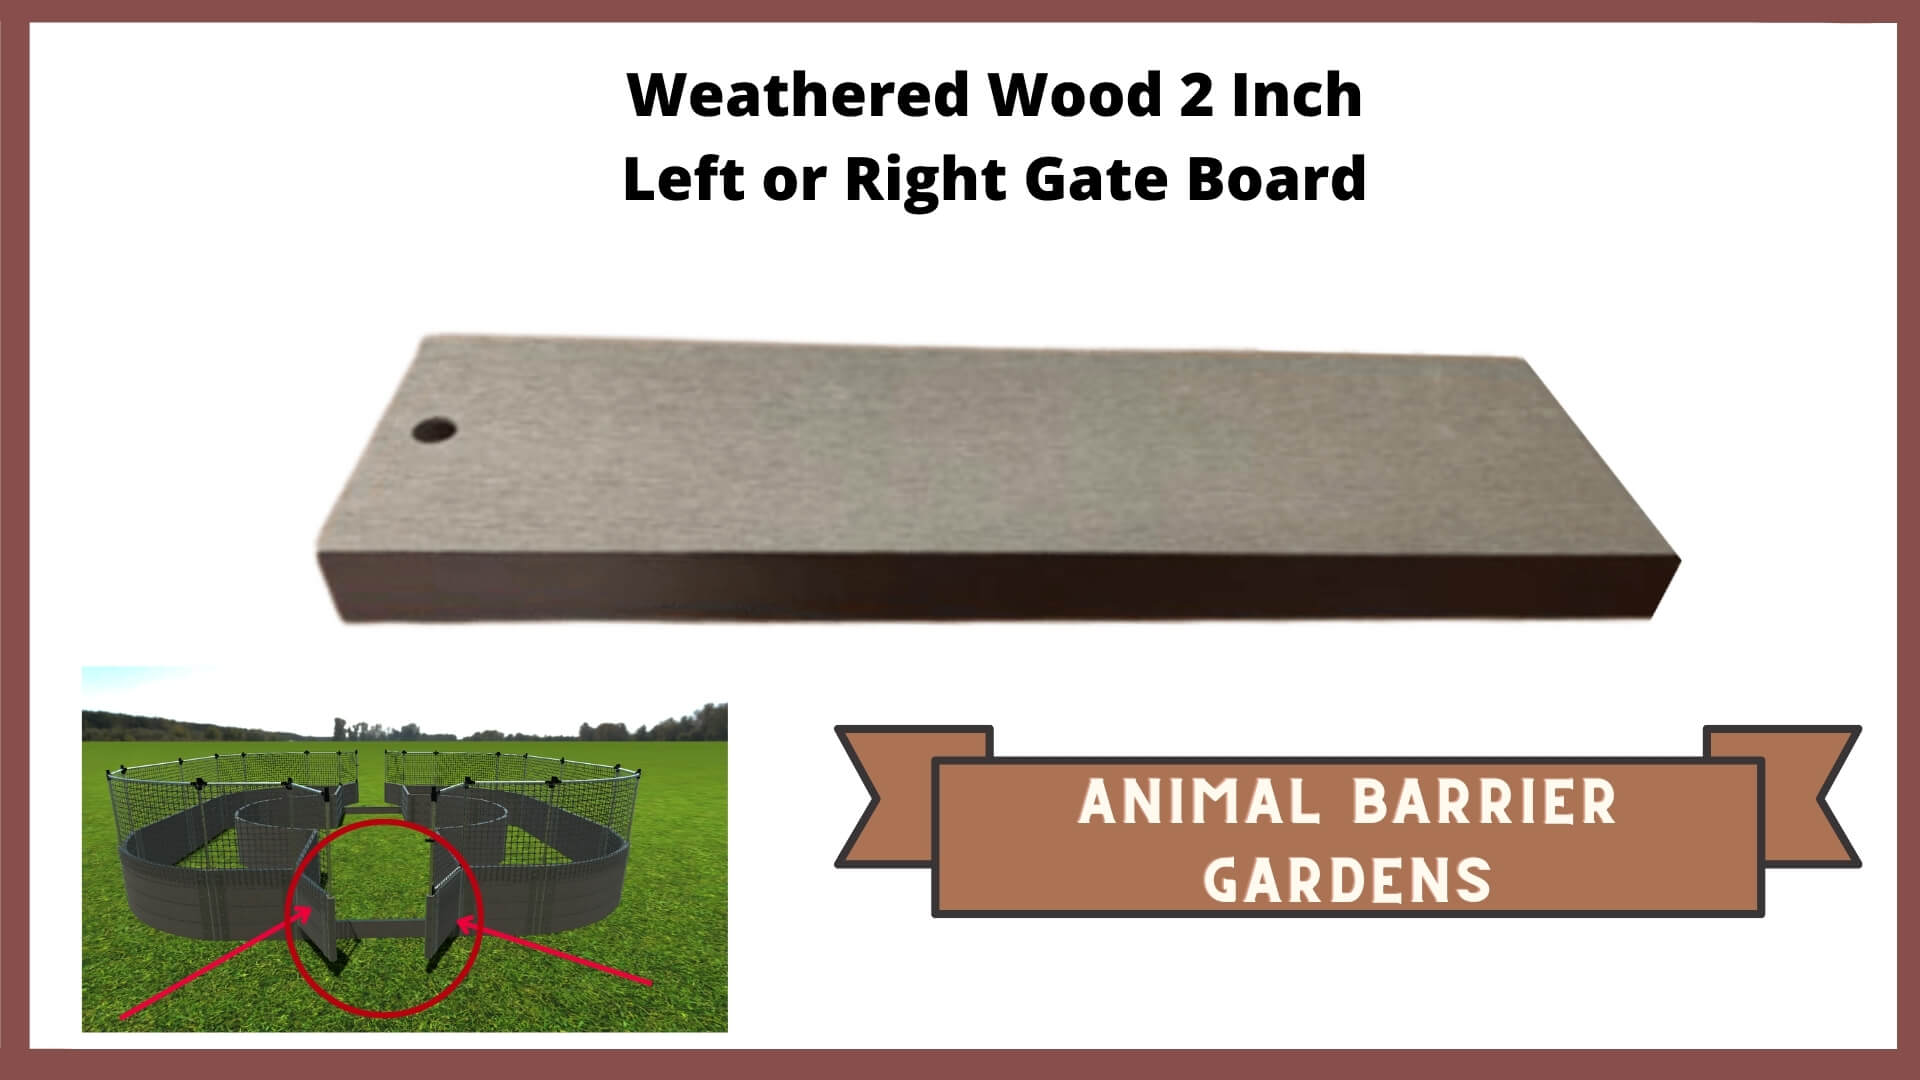 REPLACEMENT PARTS for: Stack & Extend Animal Barrier Kits & Gardens Accessories Frame It All Weathered Wood 2 Inch Left or Right Gate Board 